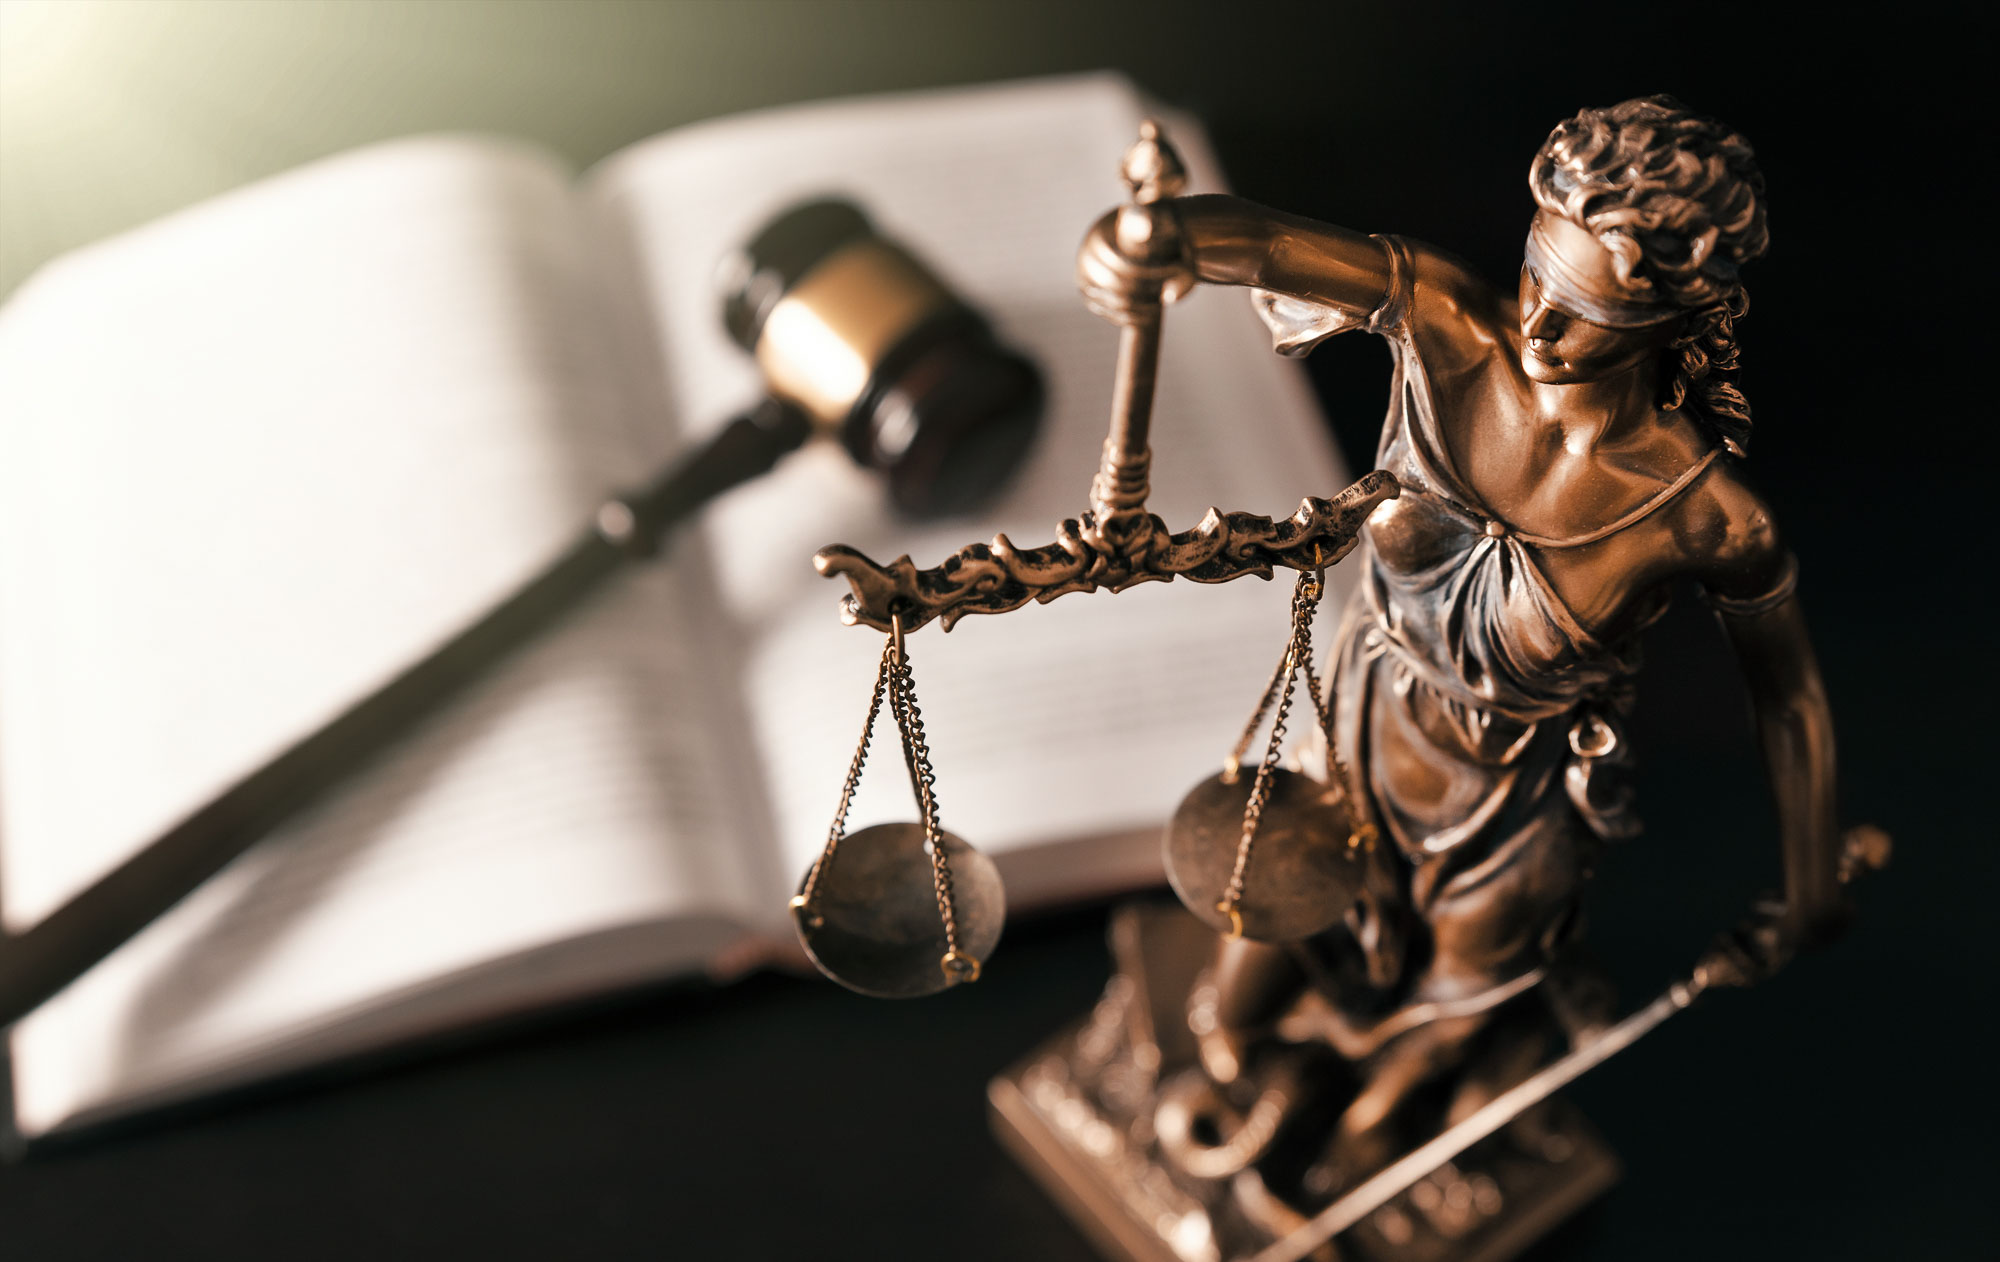 Lady justice representing victims of sexual abuse